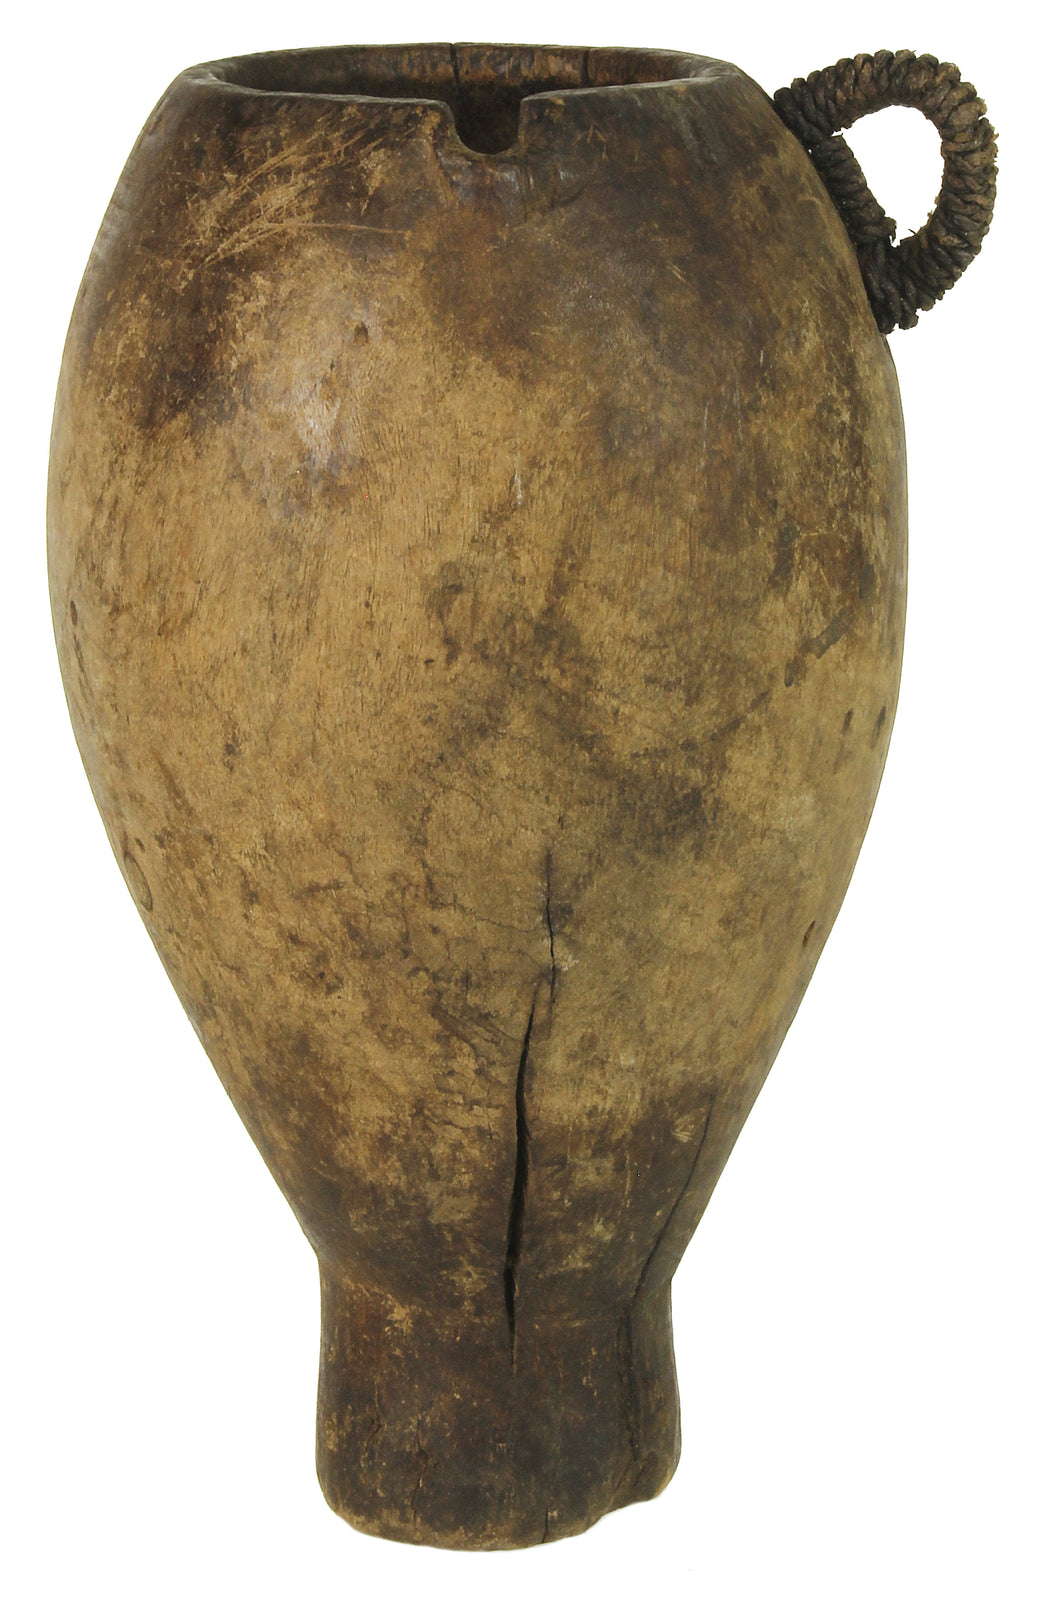 Vintage Wood & Leather Vessel from Congo, Africa | 11.5" - Niger Bend